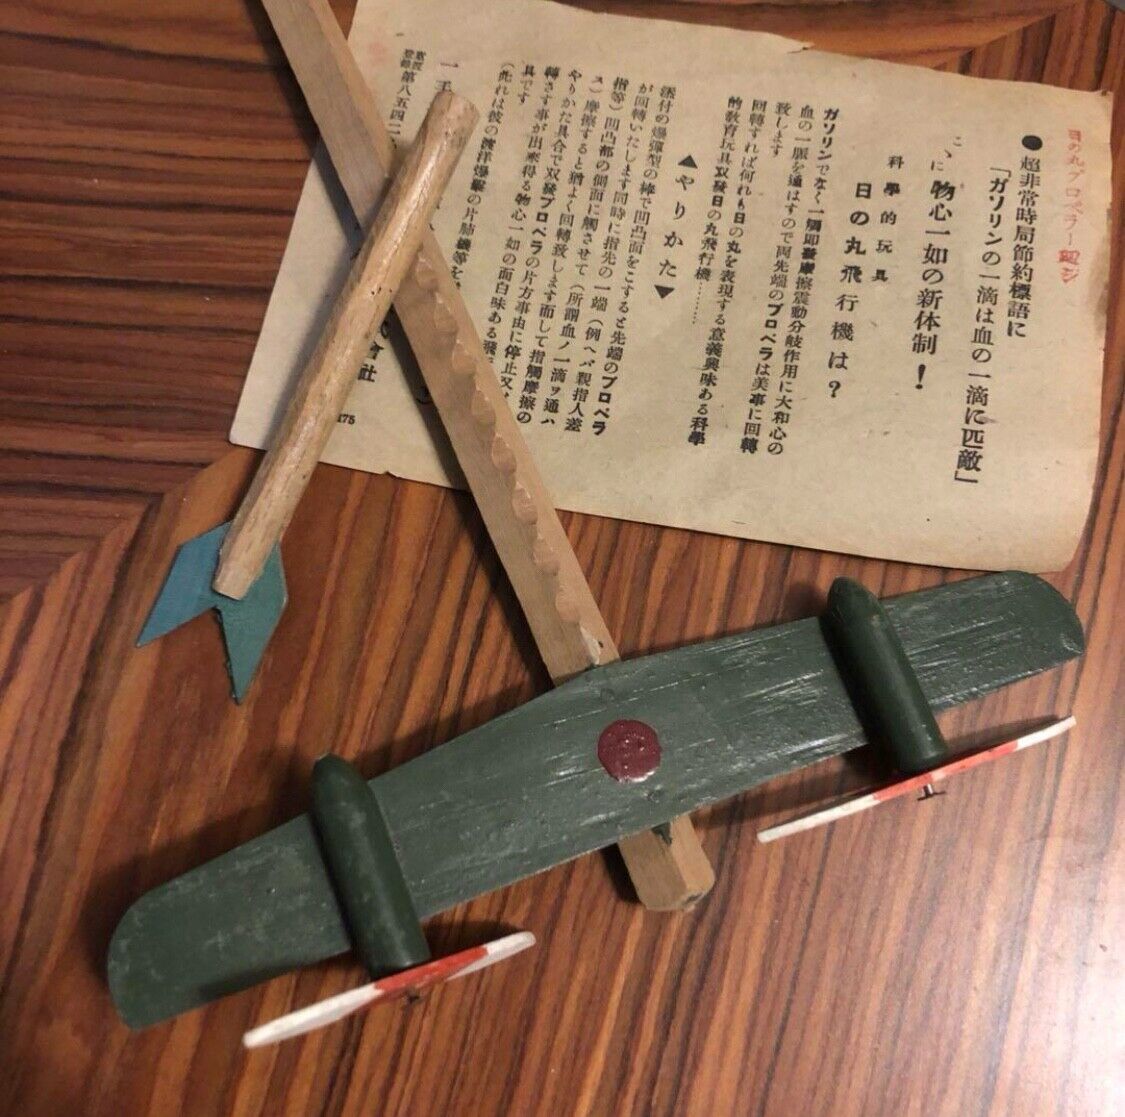 World War II Imperial Japanese Fighter Plane Toy with Original Manual